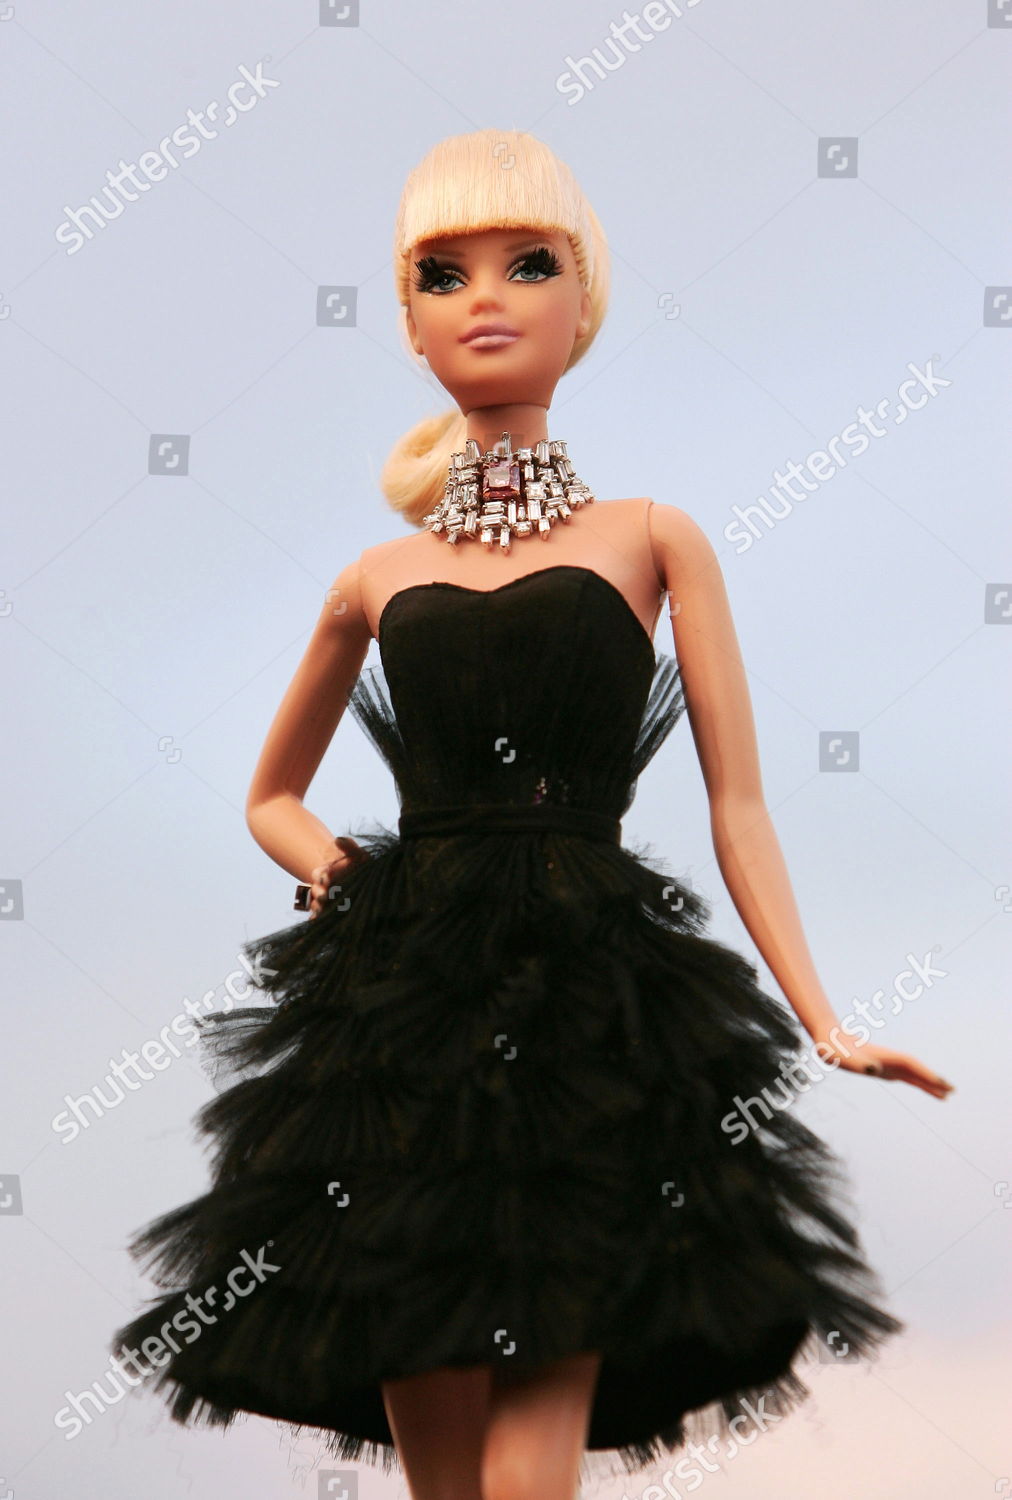 the most expensive barbie doll